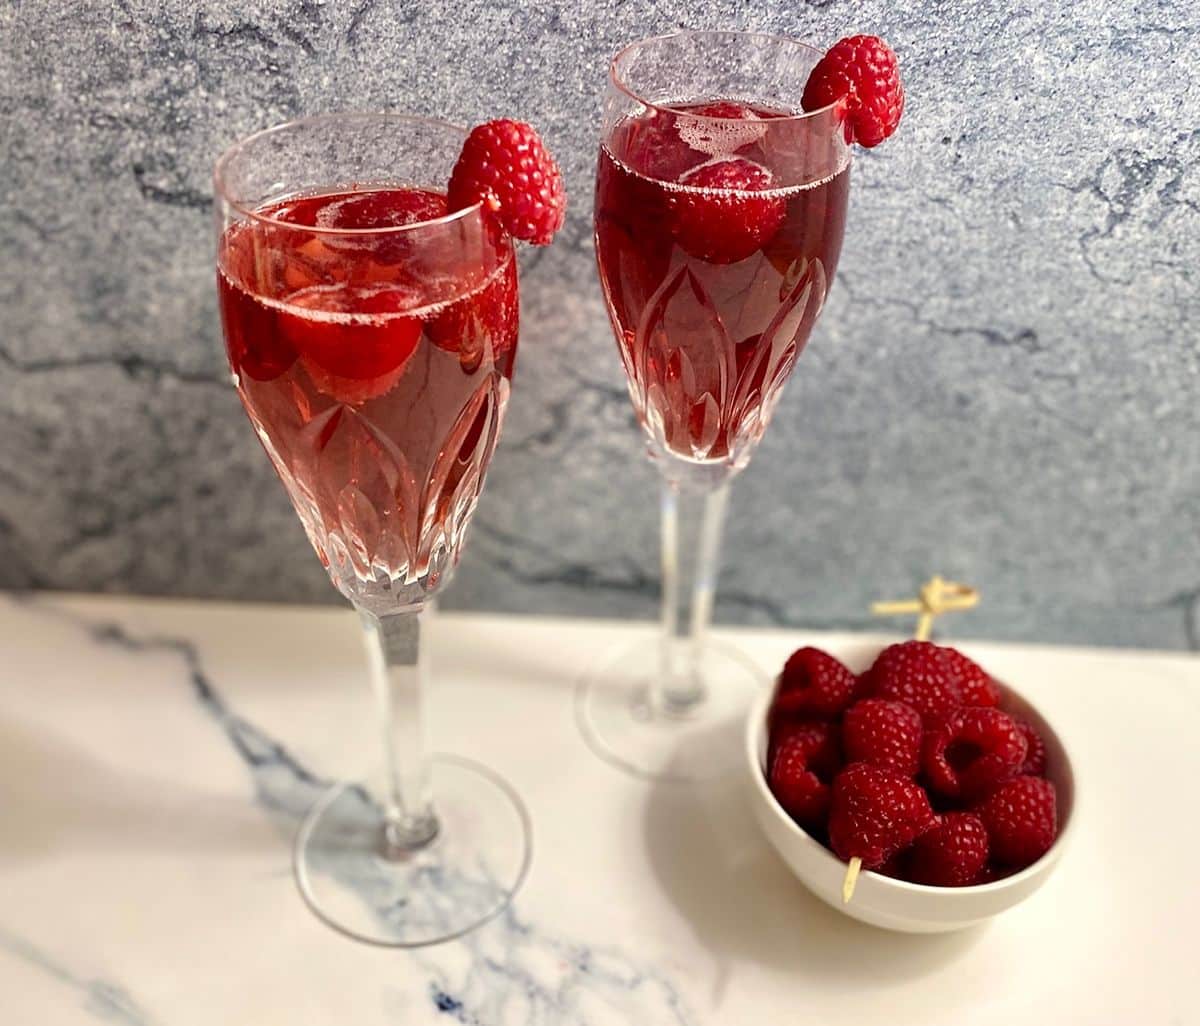 Kir Royale Cocktail Recipe - The Art of Food and Wine